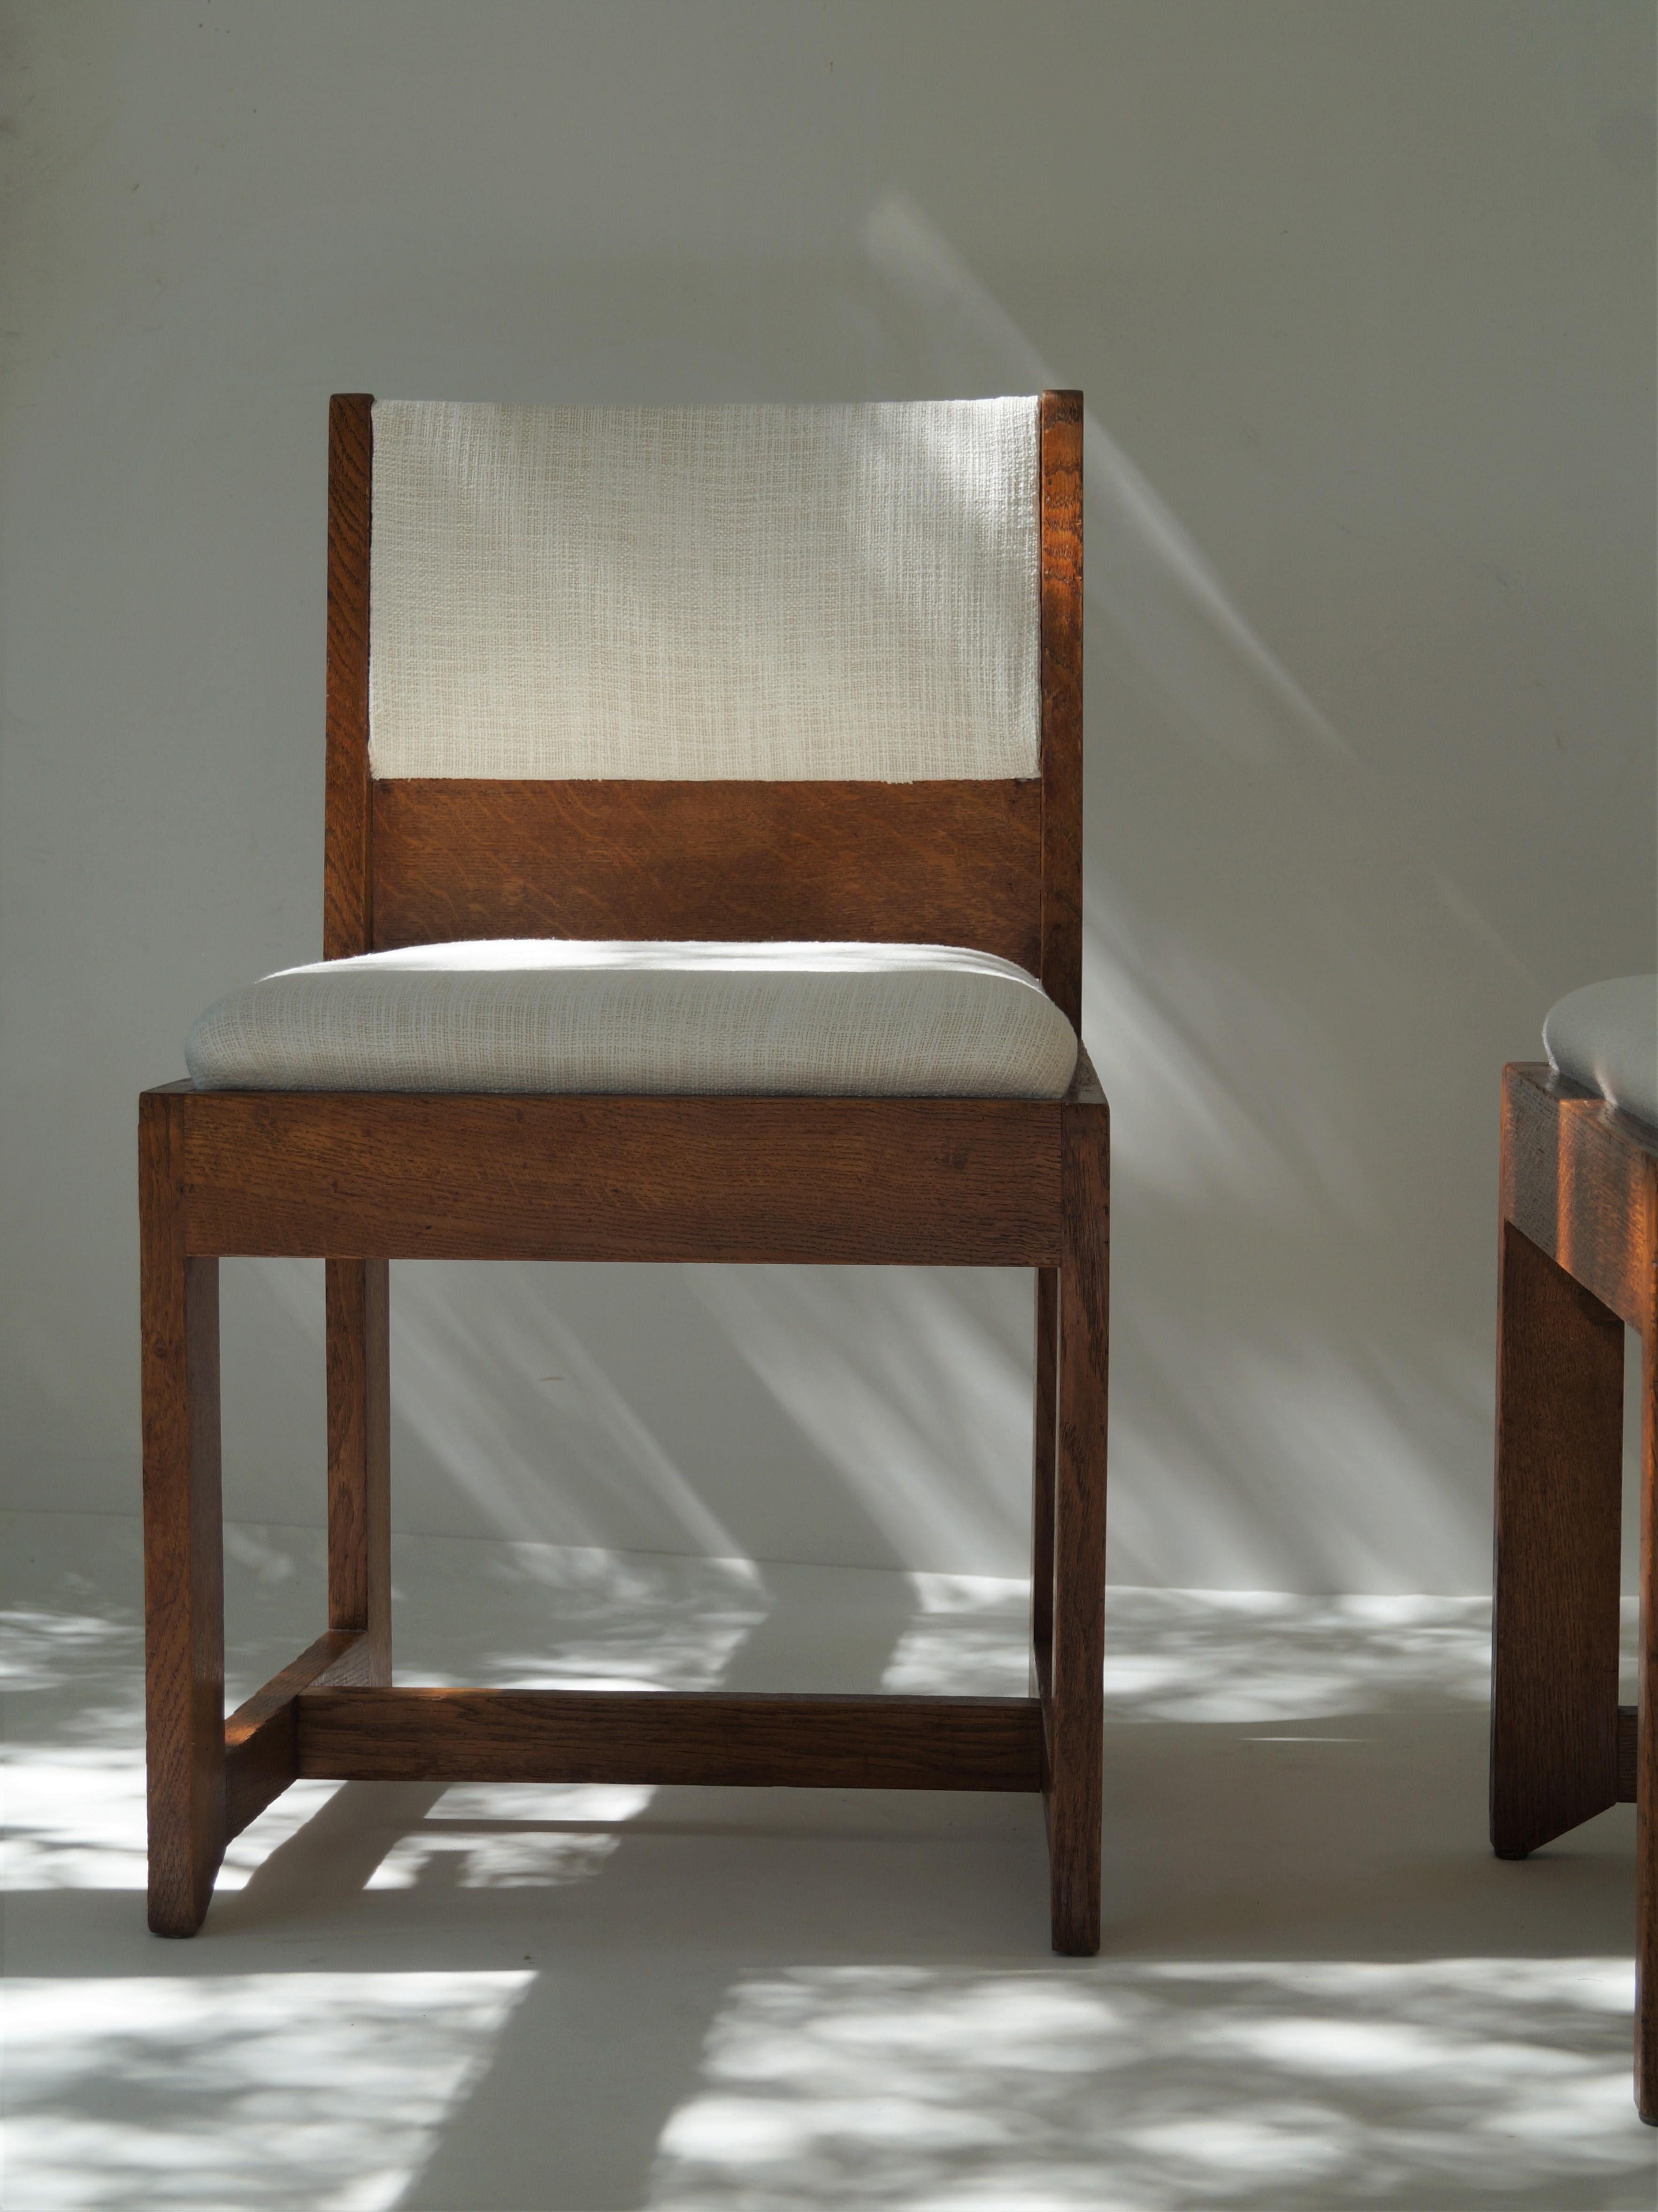 Dutch Art Deco Modernist set of chairs by H. Wouda for Pander, 1924 For Sale 6